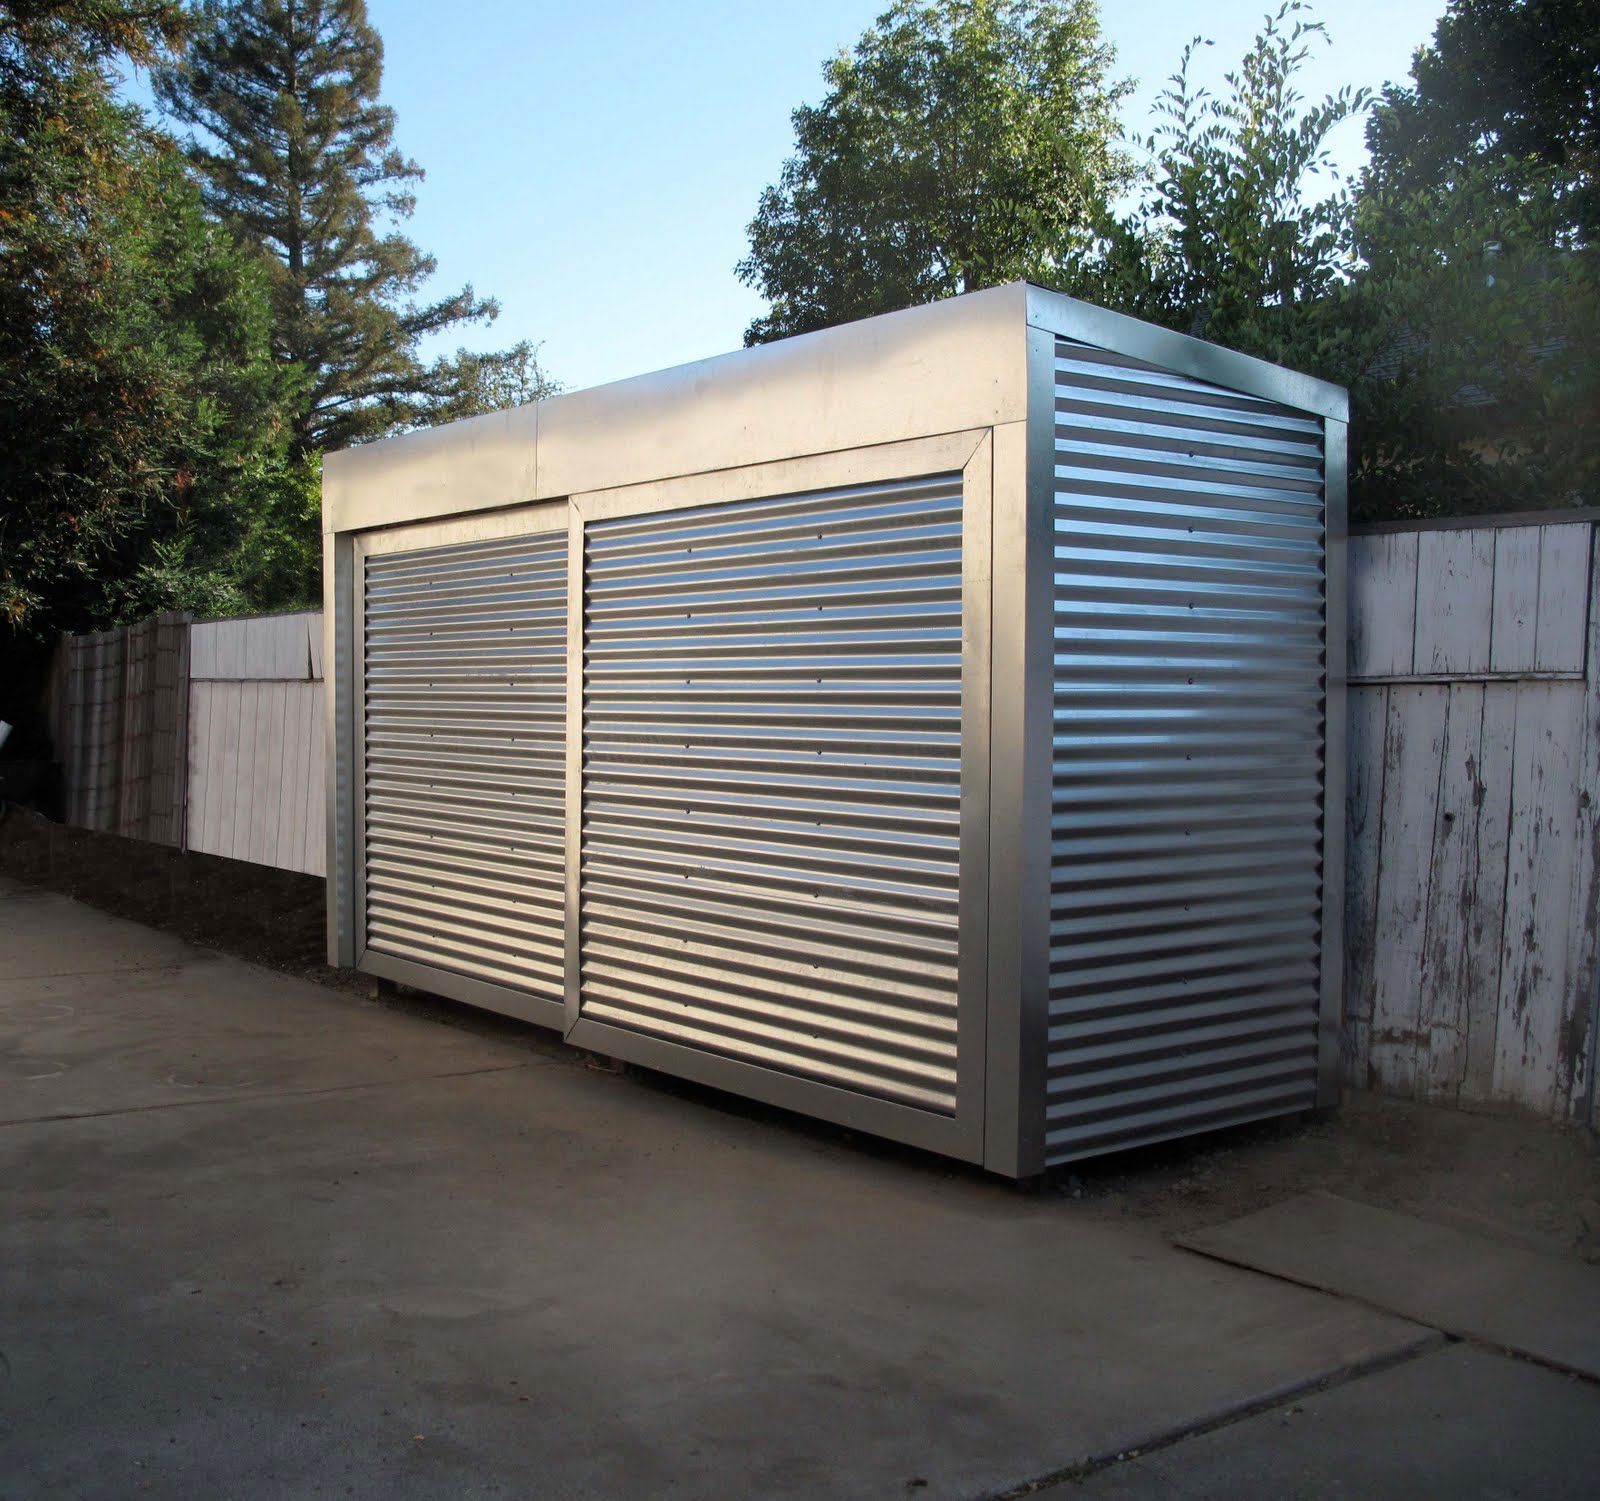 Simple Steel Garages with Two-Levels Ideas